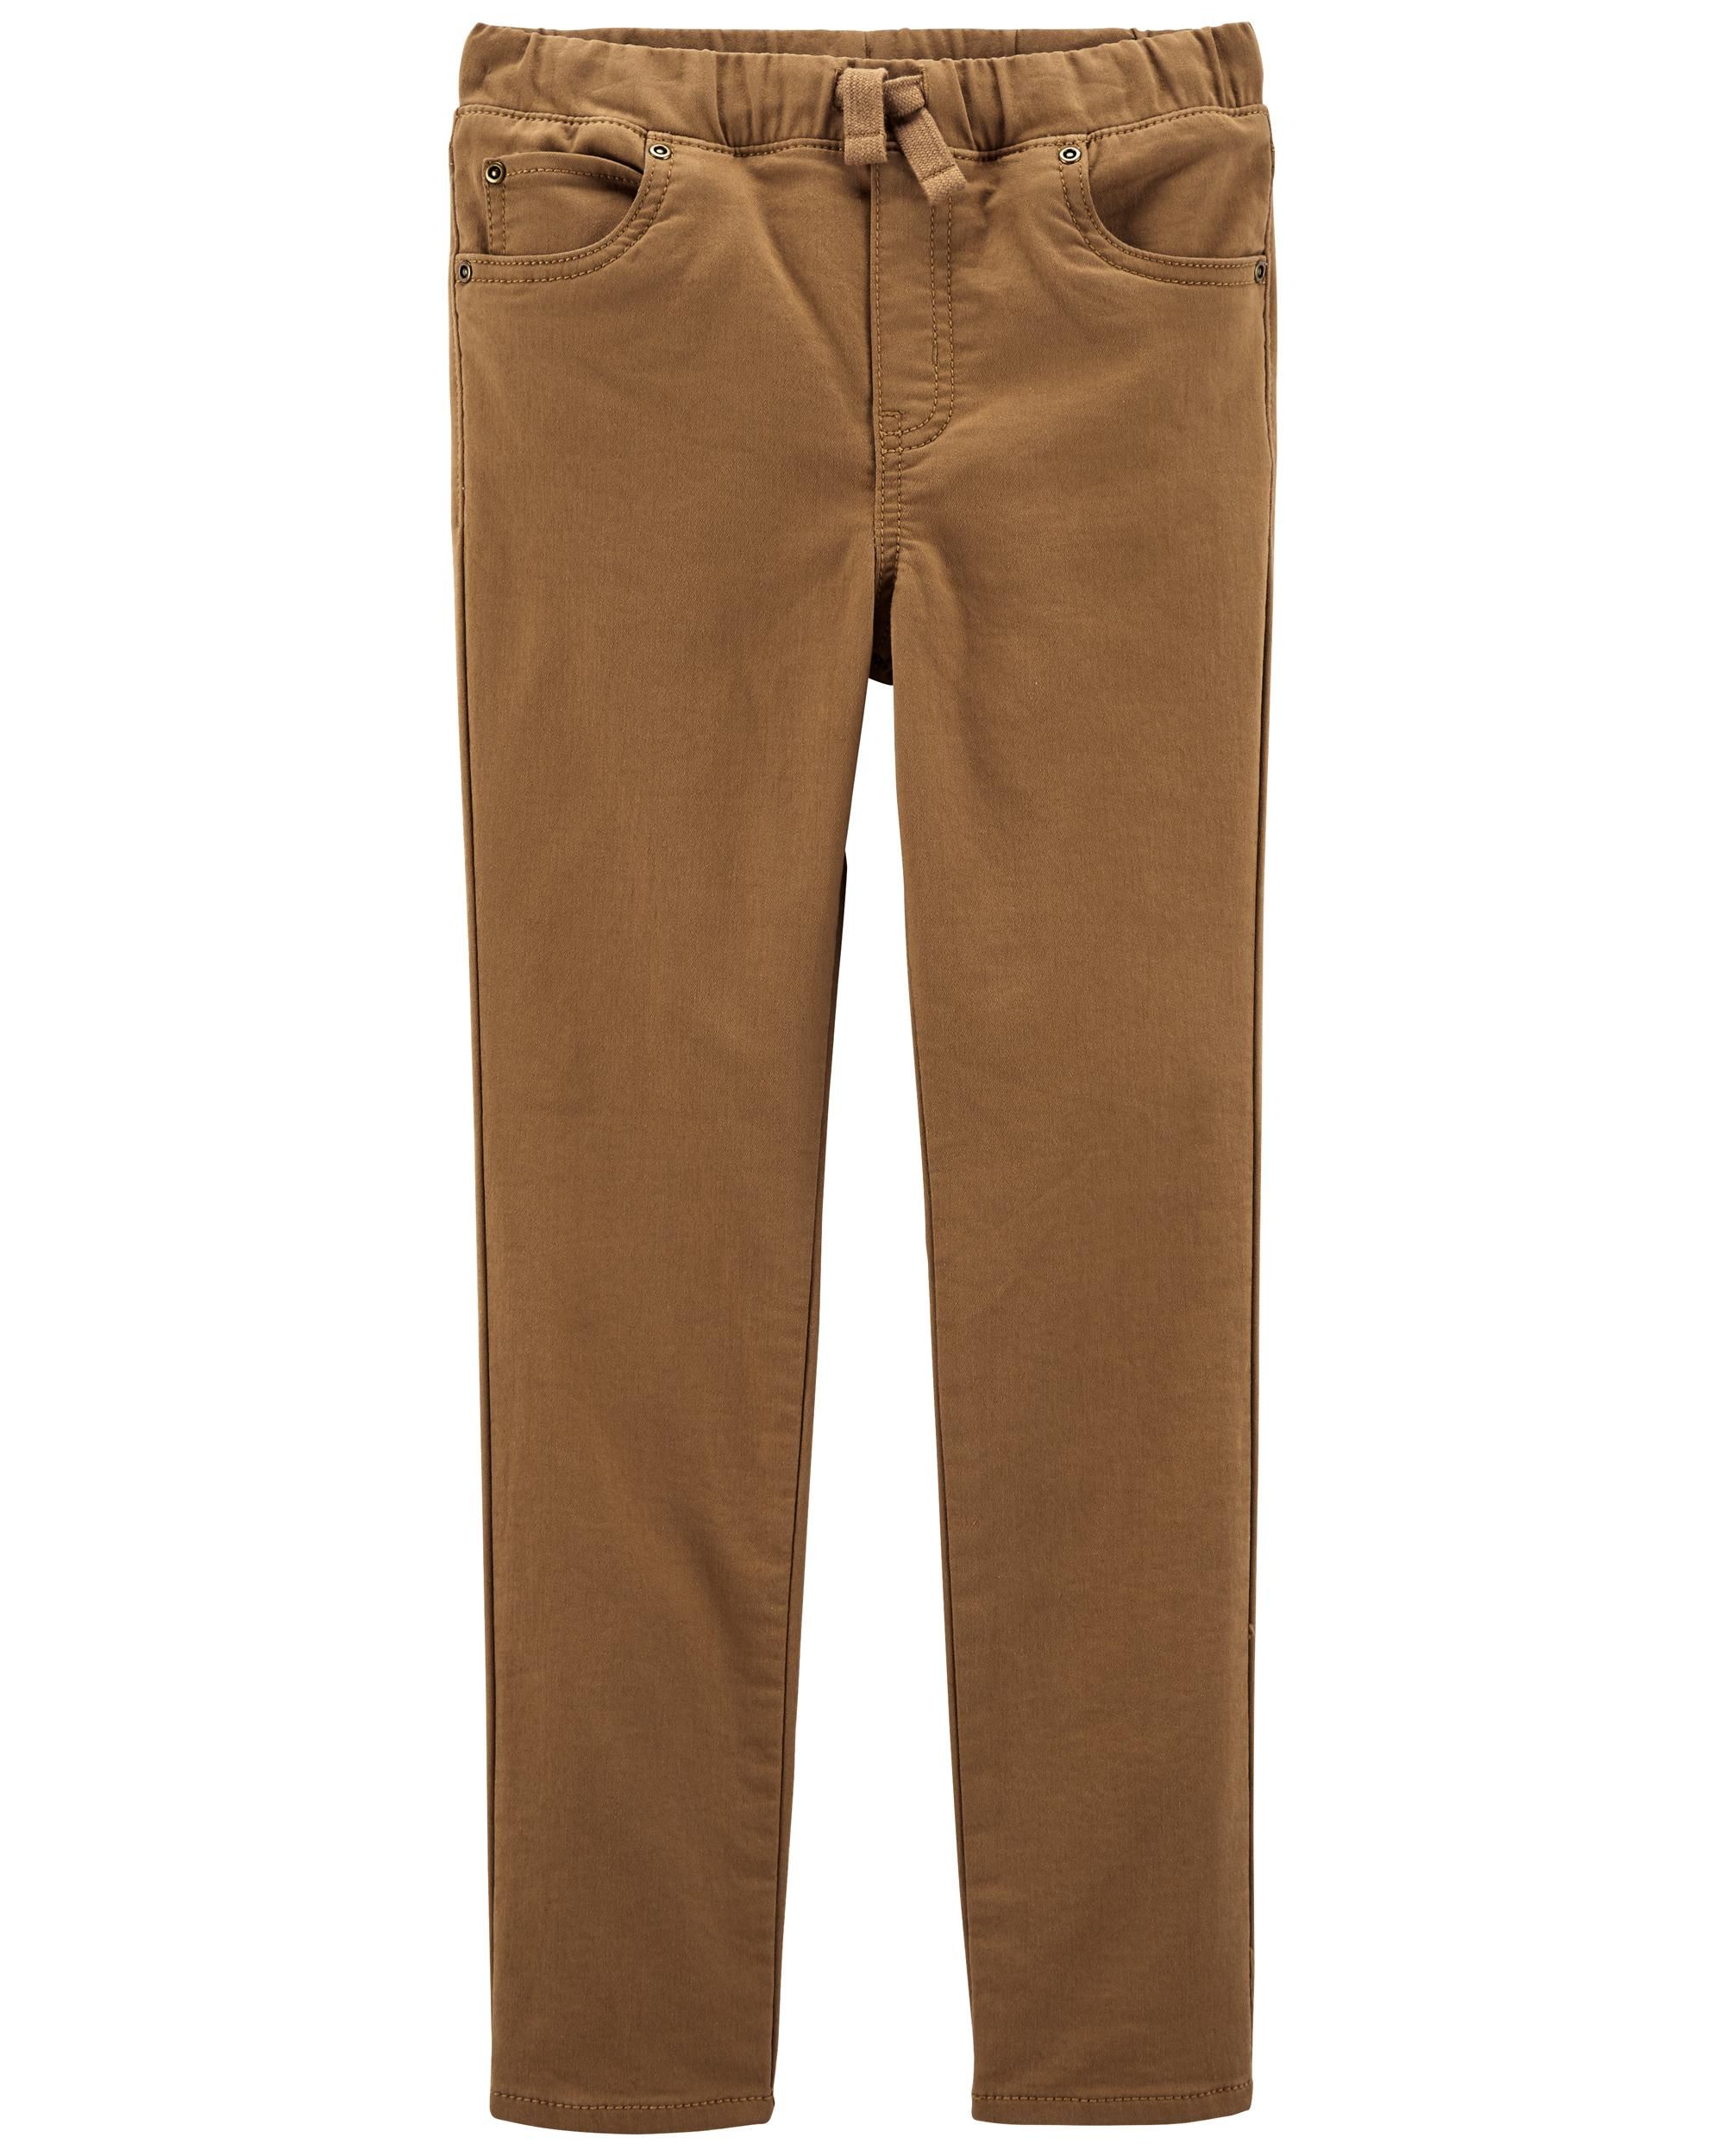 Pull-On Woven Pants | Carter's